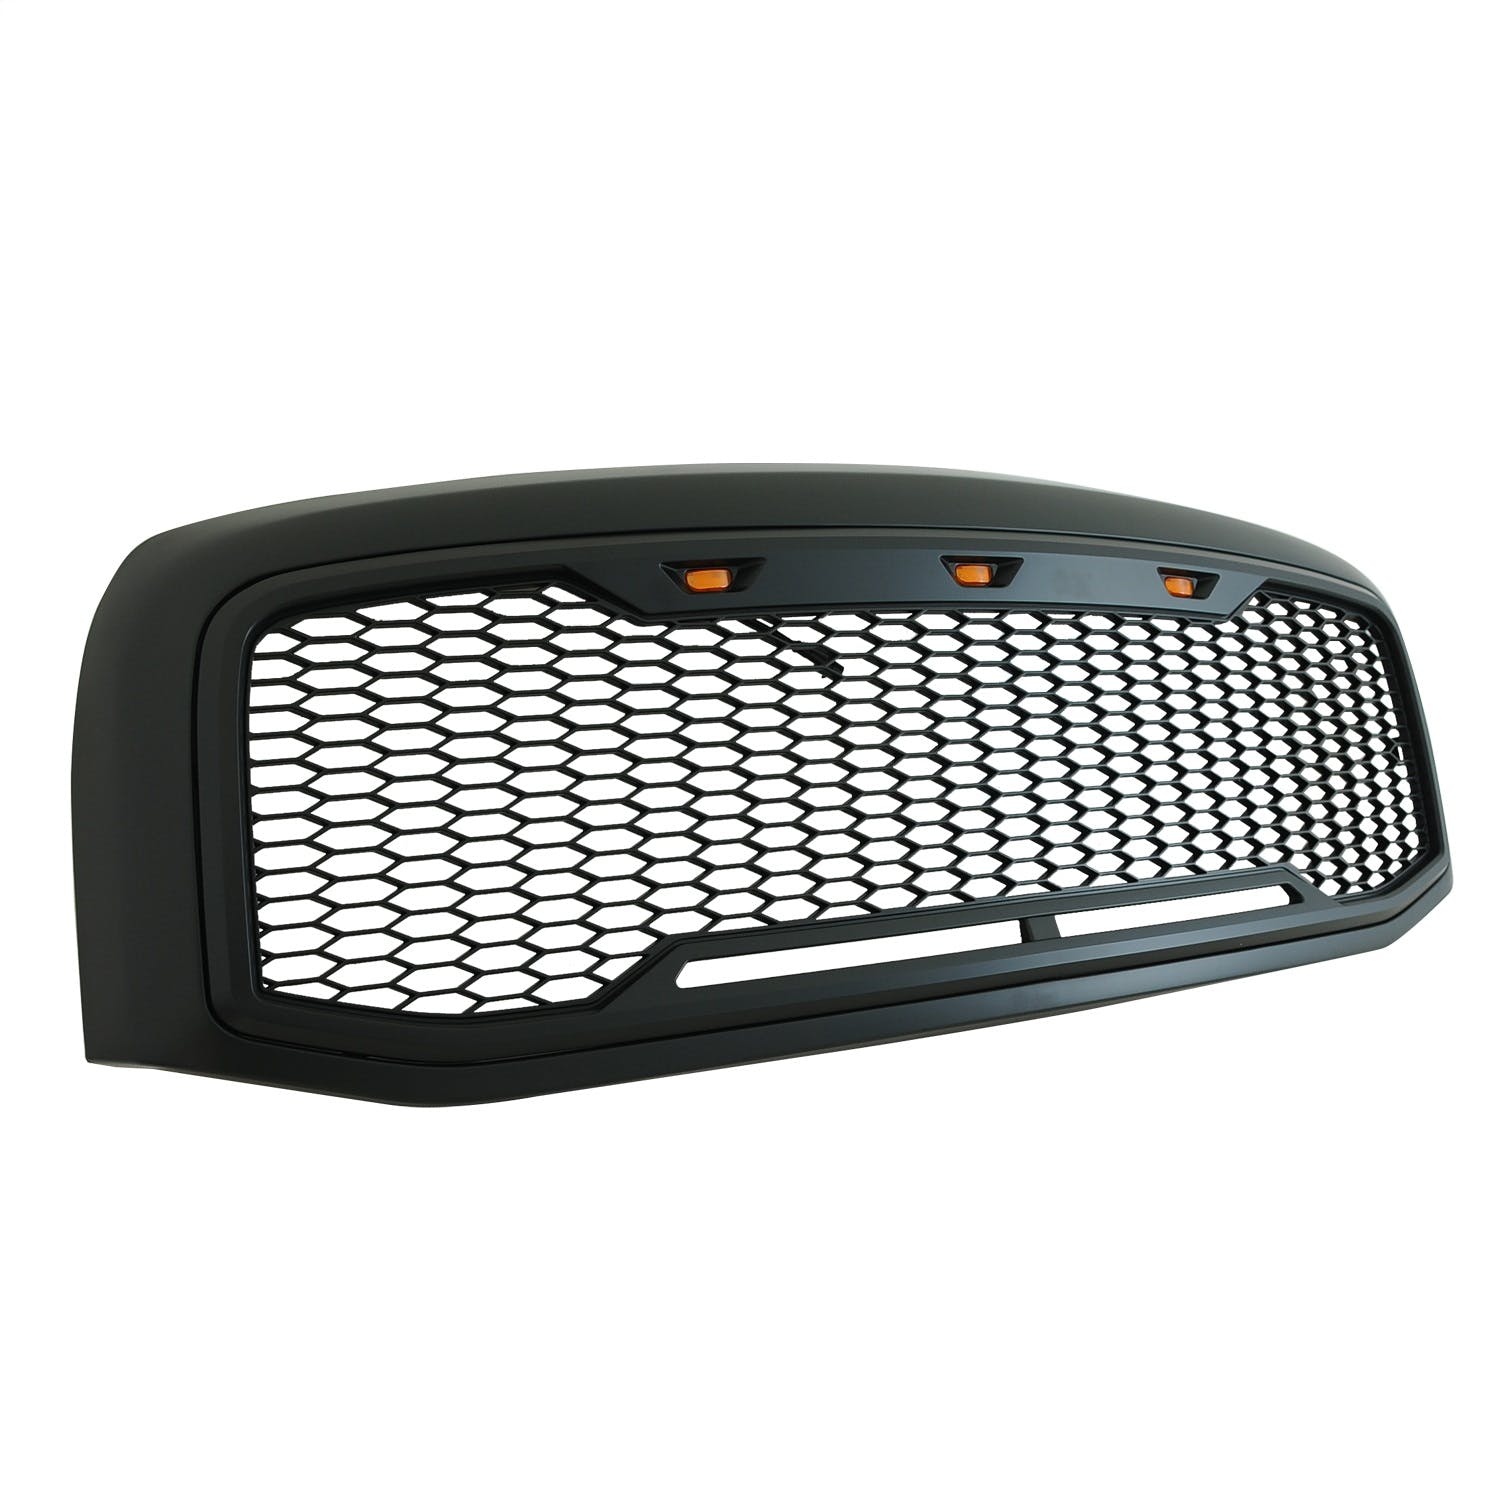 Paramount Automotive 41-0195MB Impulse Packaged Grille, ABS LED, Meta Black